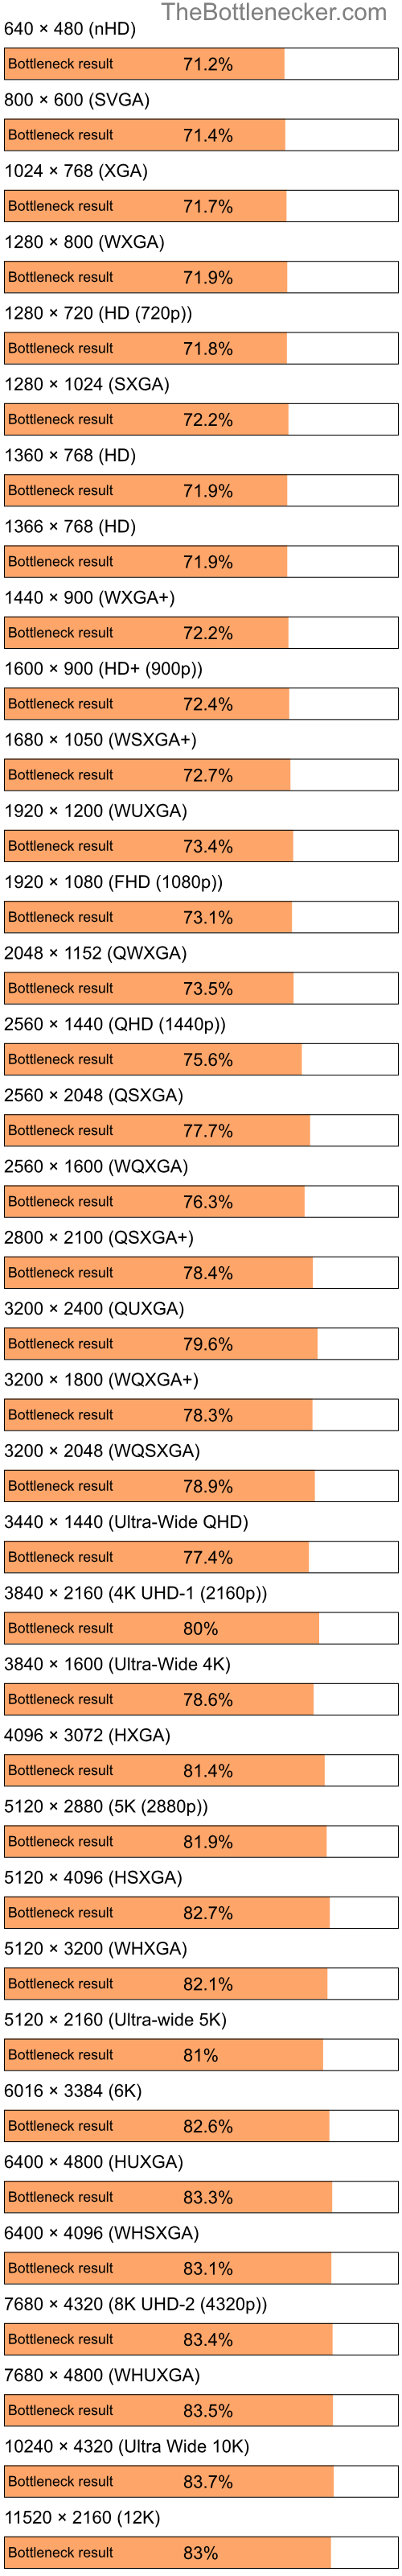 Bottleneck results by resolution for Intel Celeron M 420 and AMD Radeon HD 6250 in Graphic Card Intense Tasks